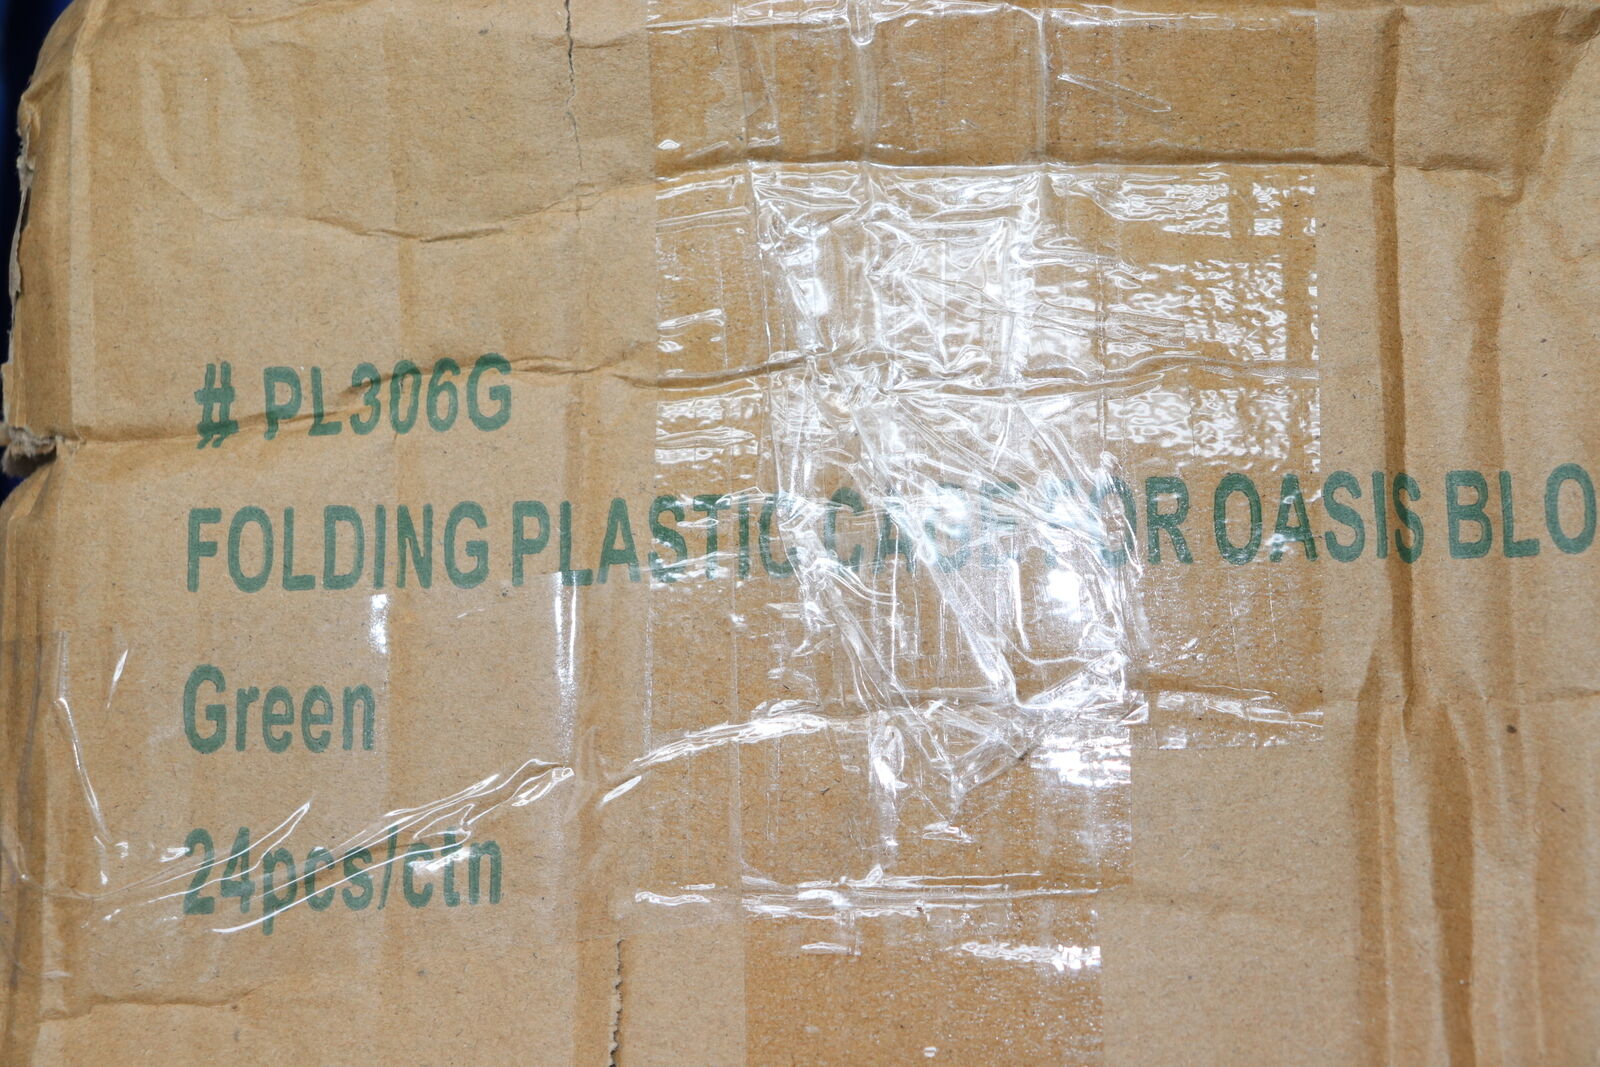 (24-pk) Folding Plastic Cage For Oasis Block Green Pl306g